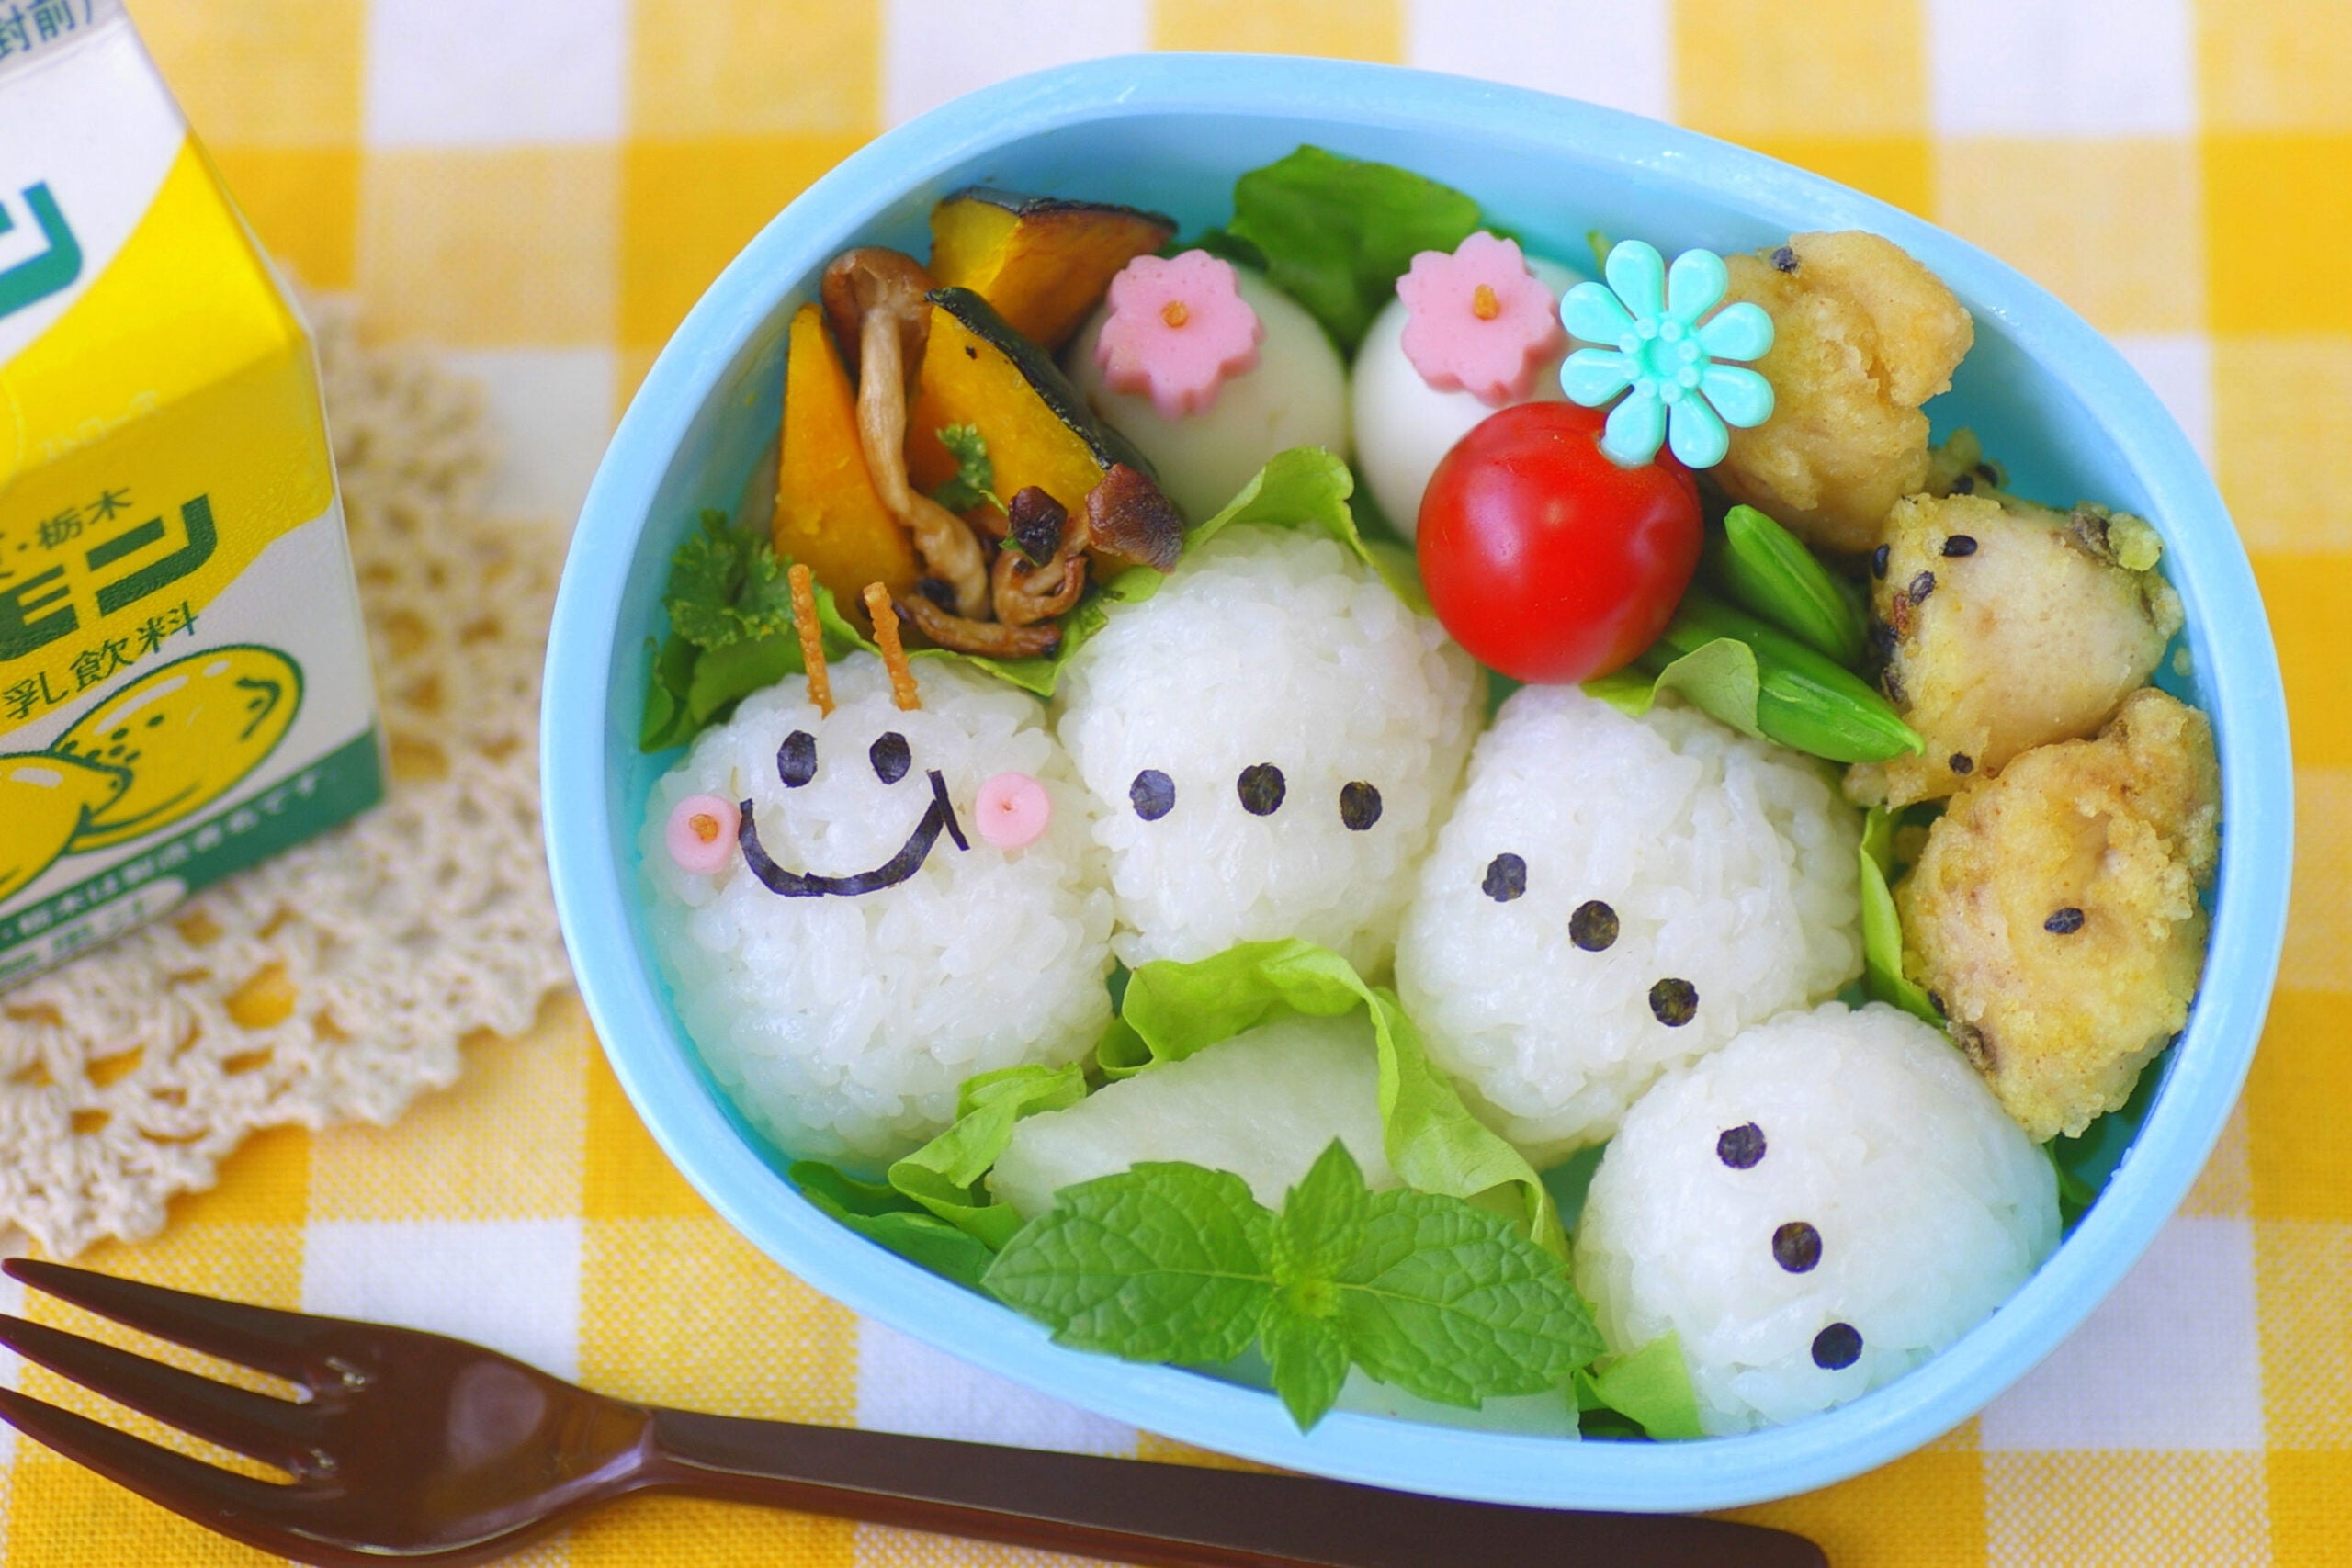 Hello Kitty In Bento Box Form Is What We All Need Right Now